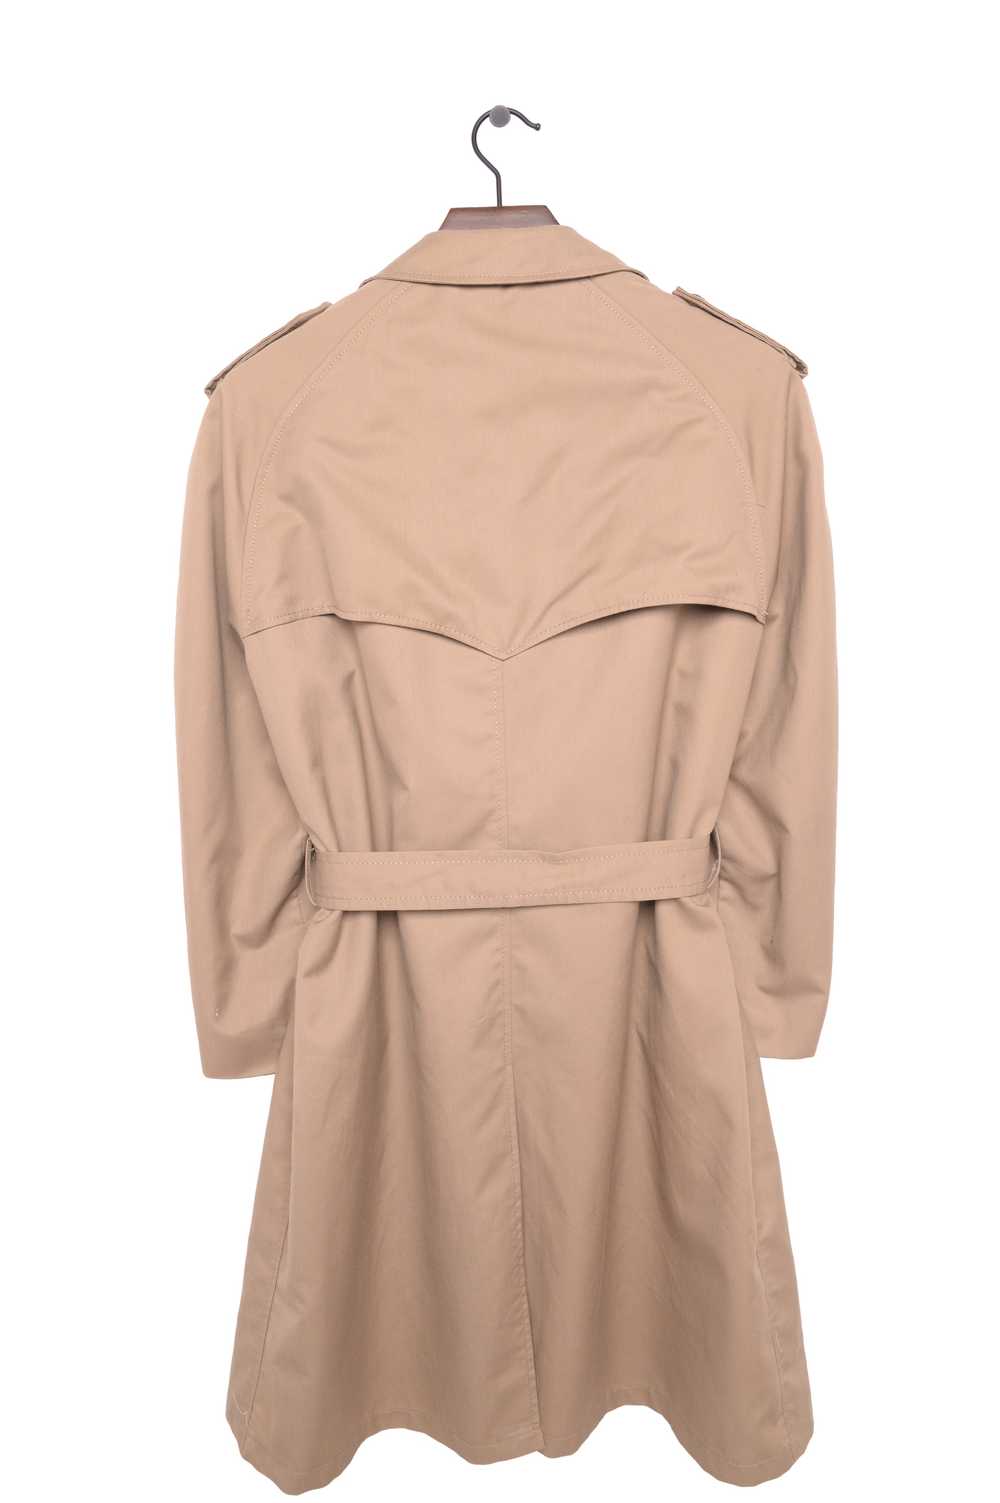 1970s Belted Trench Coat - image 2